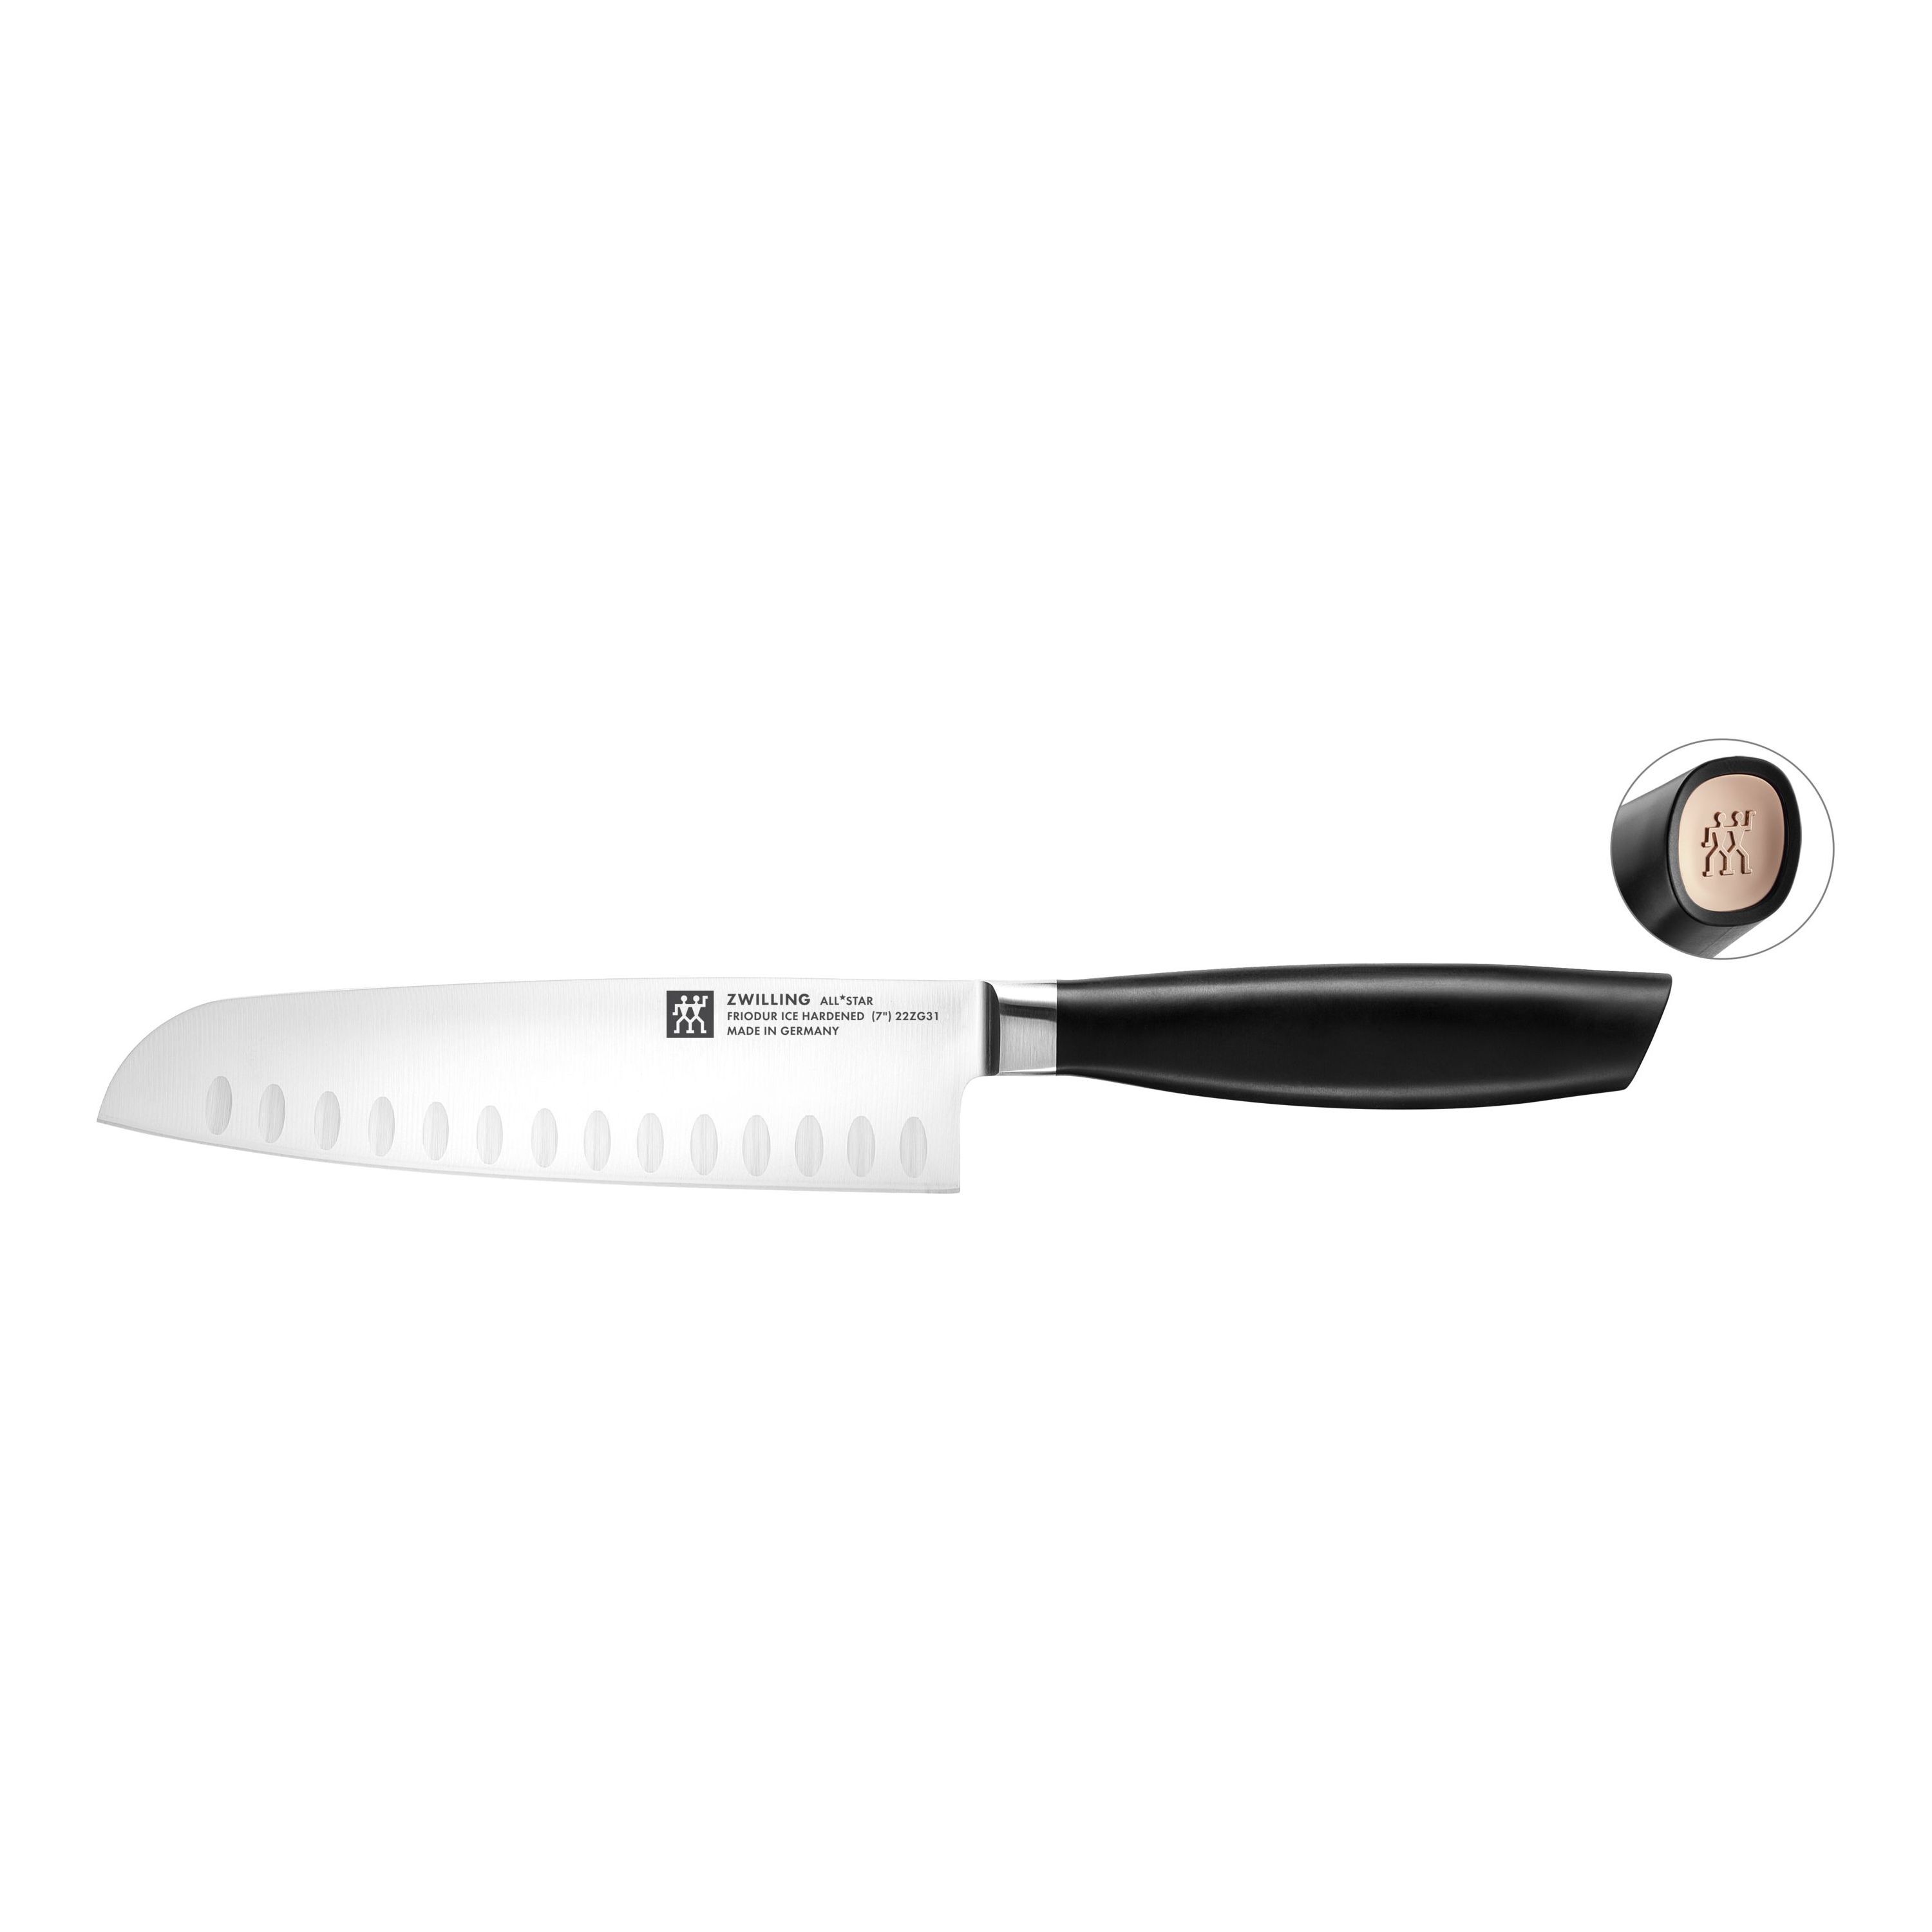 ZWILLING All * Star Couteau santoku 18 cm, or rose